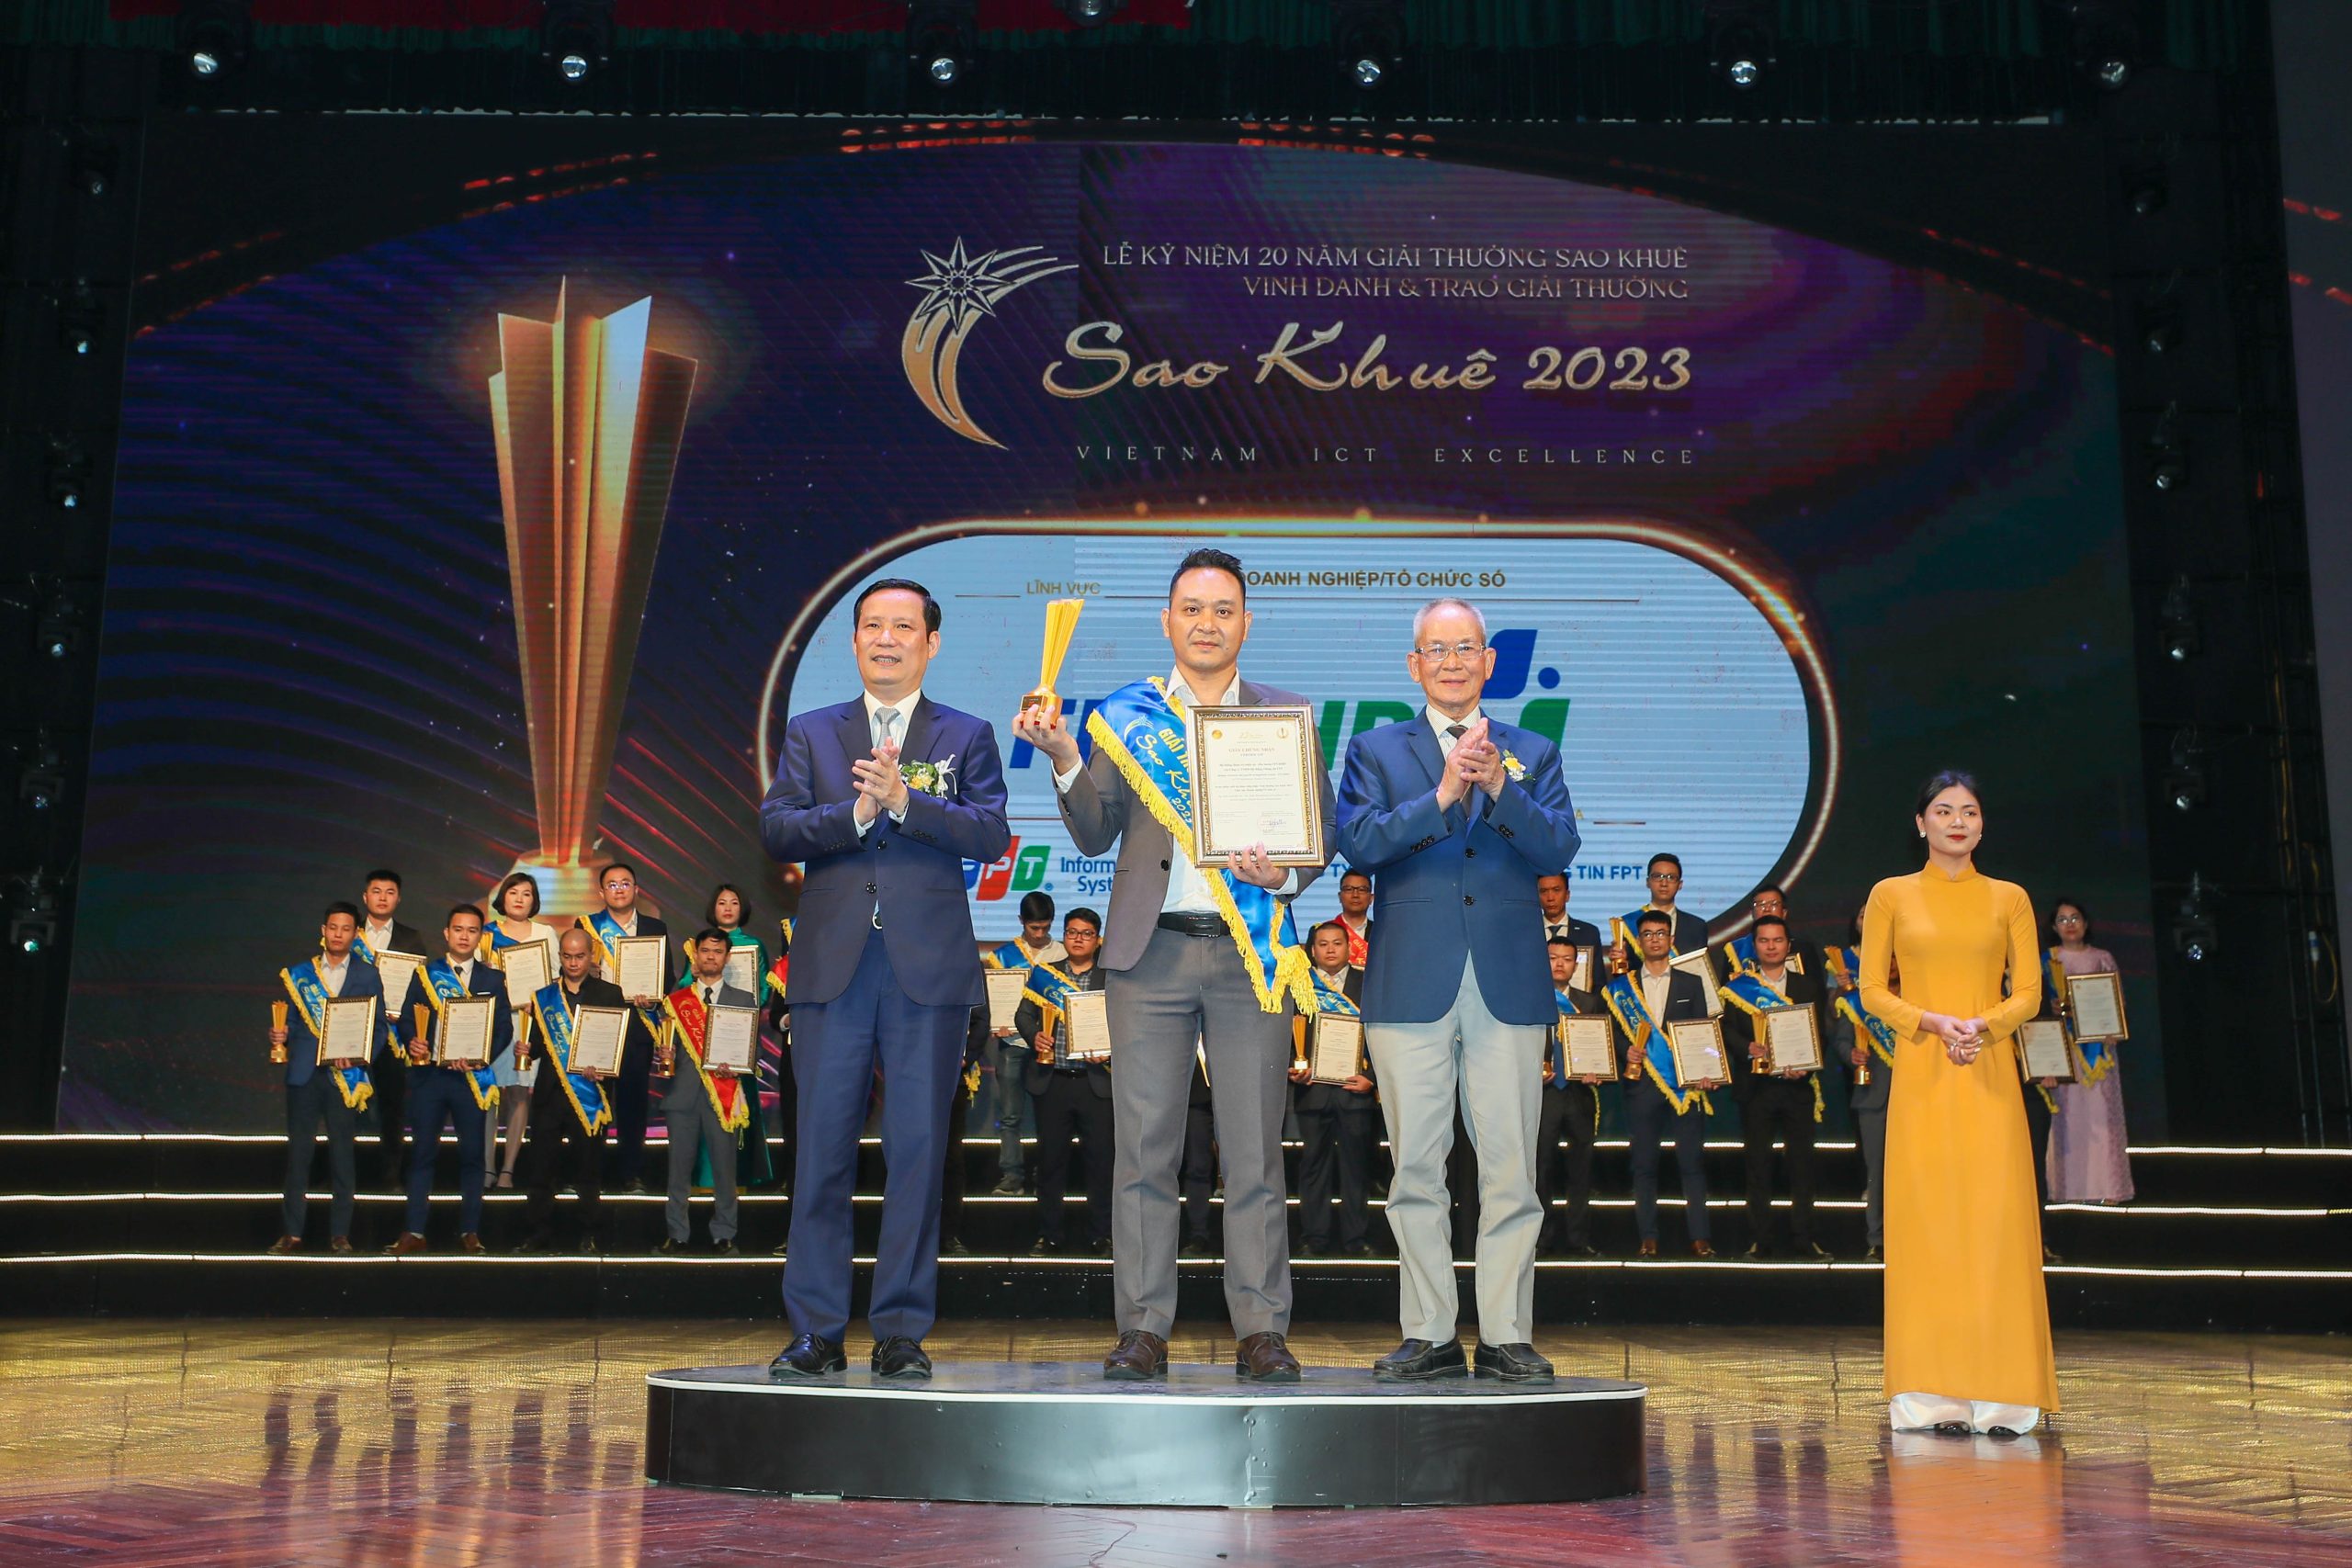 2023 Sao Khue Awards (Vietnam ICT Excellence) – Human Resources and Payroll Management System (FPT.iHRP)